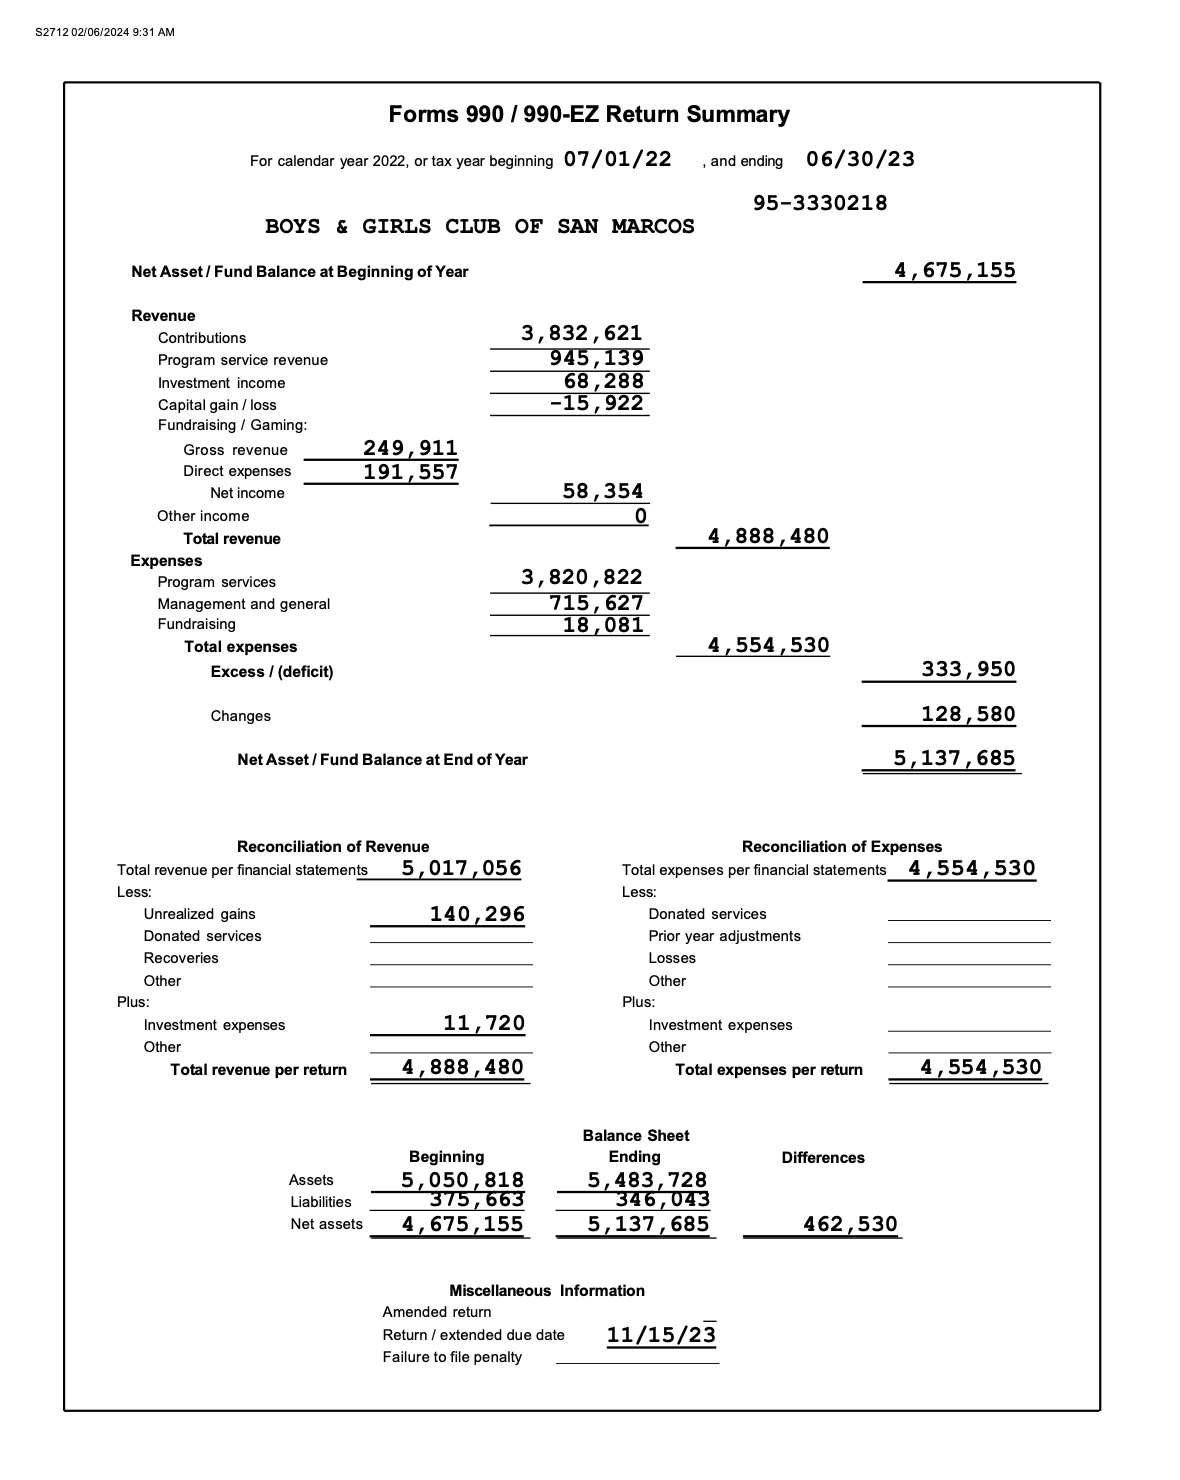 Tax return for Boys & Girls Club of San Marcos for the fiscal year ending June 30, 2023.